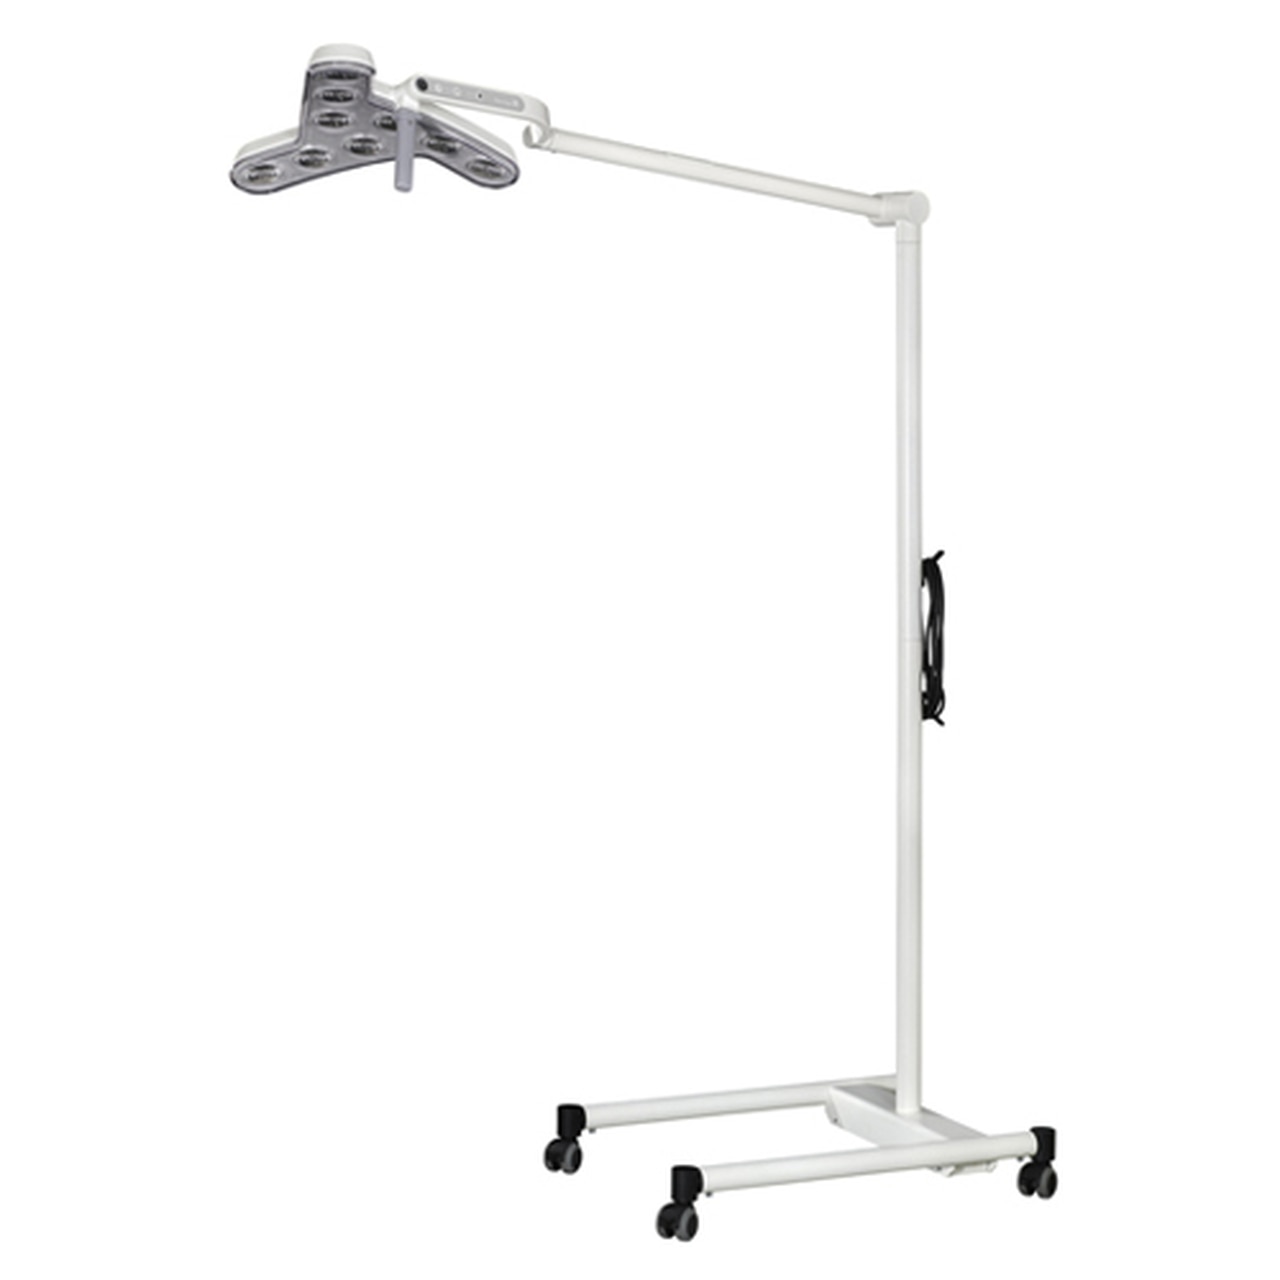 Waldmann D15918000, TRIANGO FOKUS LED 100-3 F LED Procedure Light, Medical Grade, Mobile Floor Stand, with Dimming, with Color Changing, with Adj Light Field